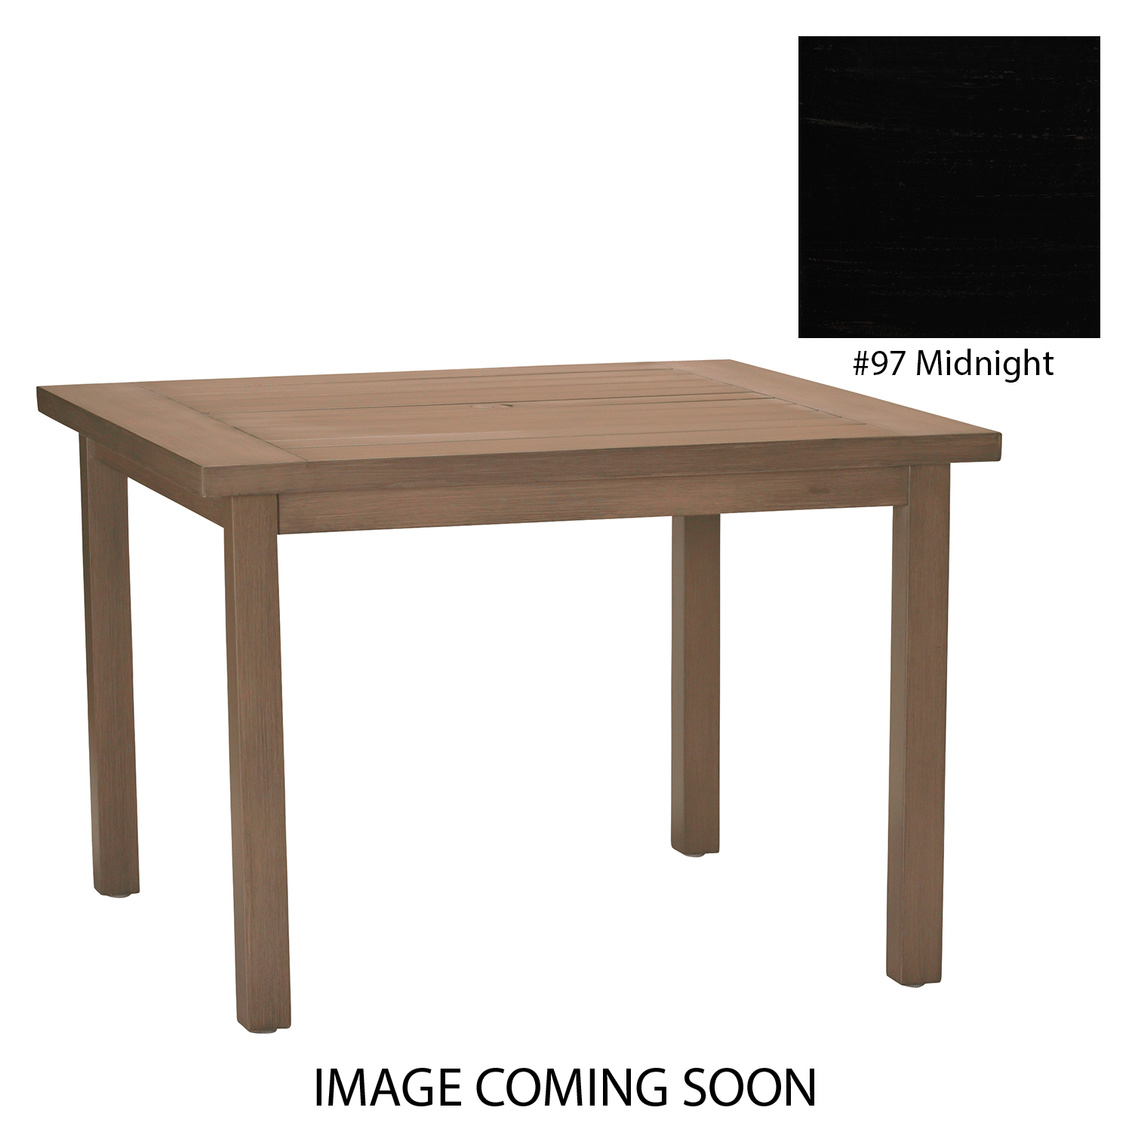 club aluminum square dining table in midnight product image